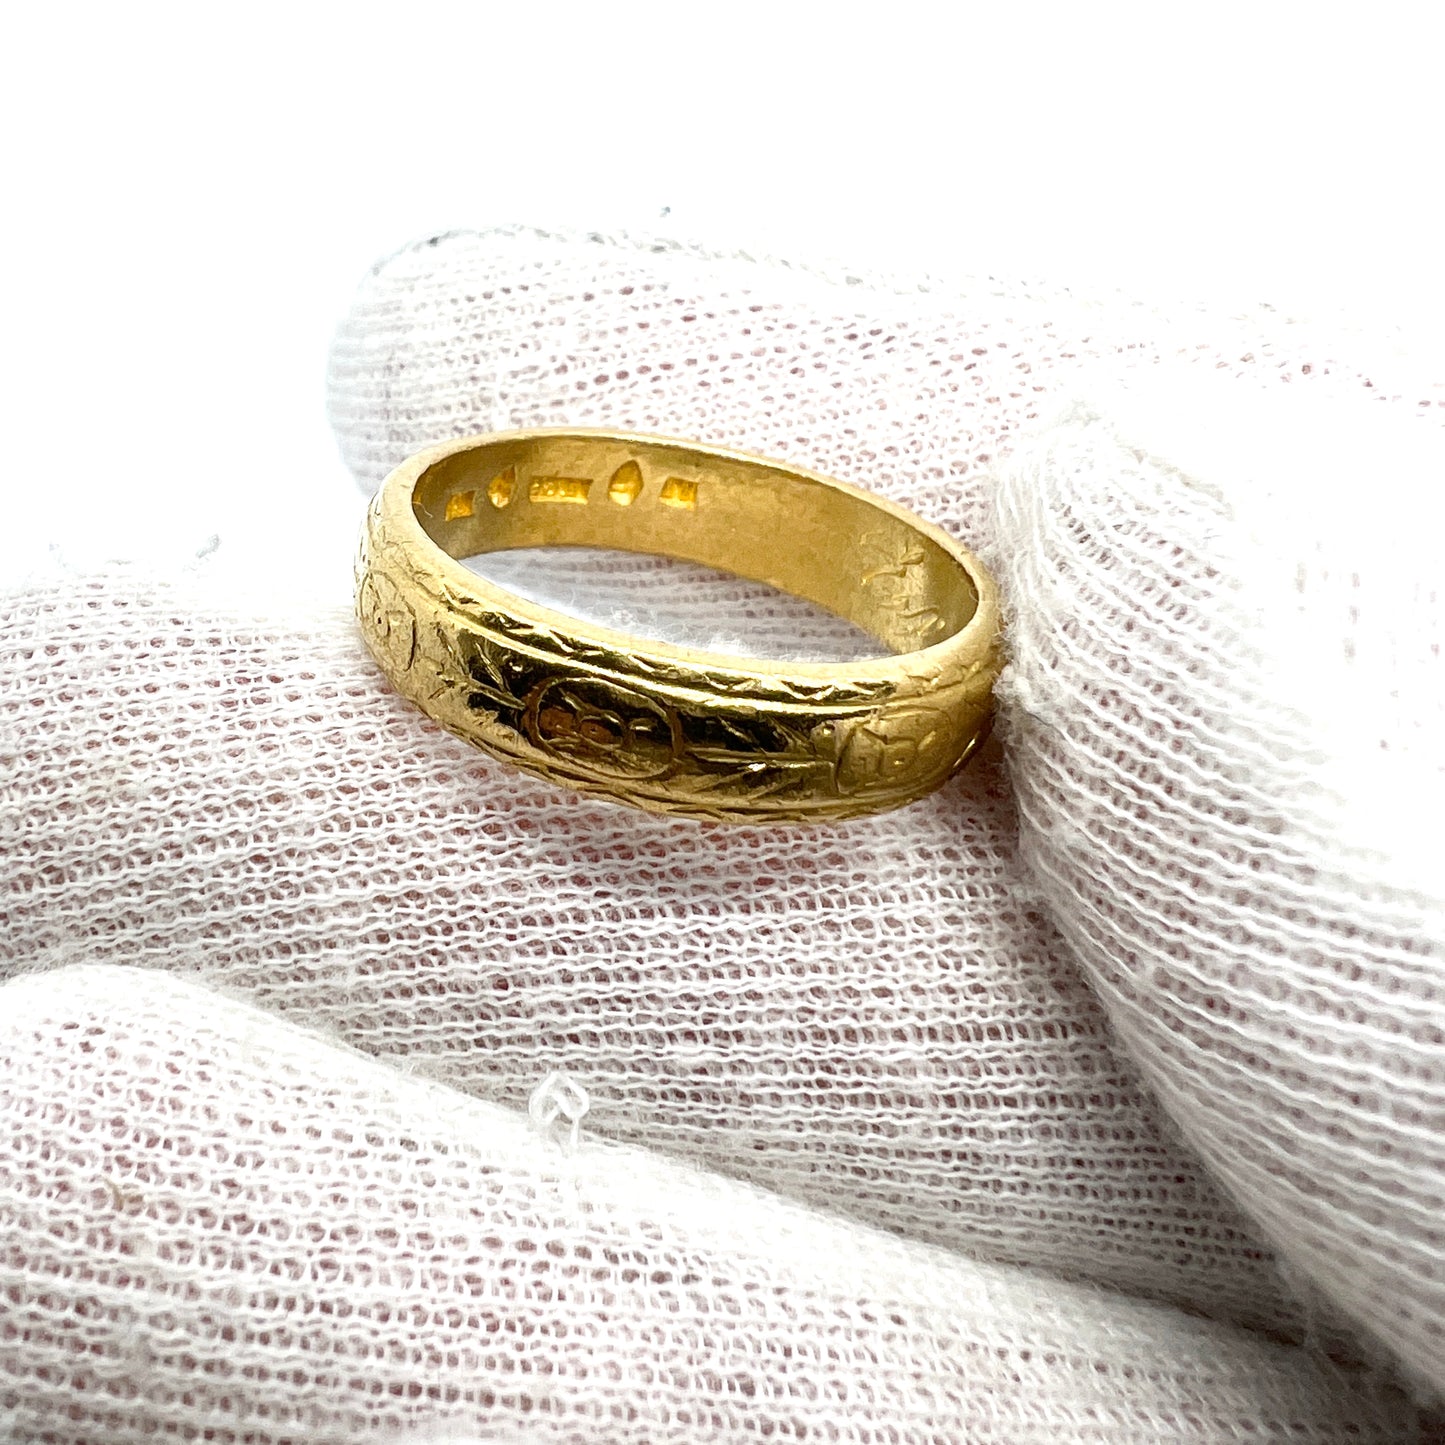 Sweden year 1913. Antique Chunky 23K Gold Men's Wedding Band Ring.